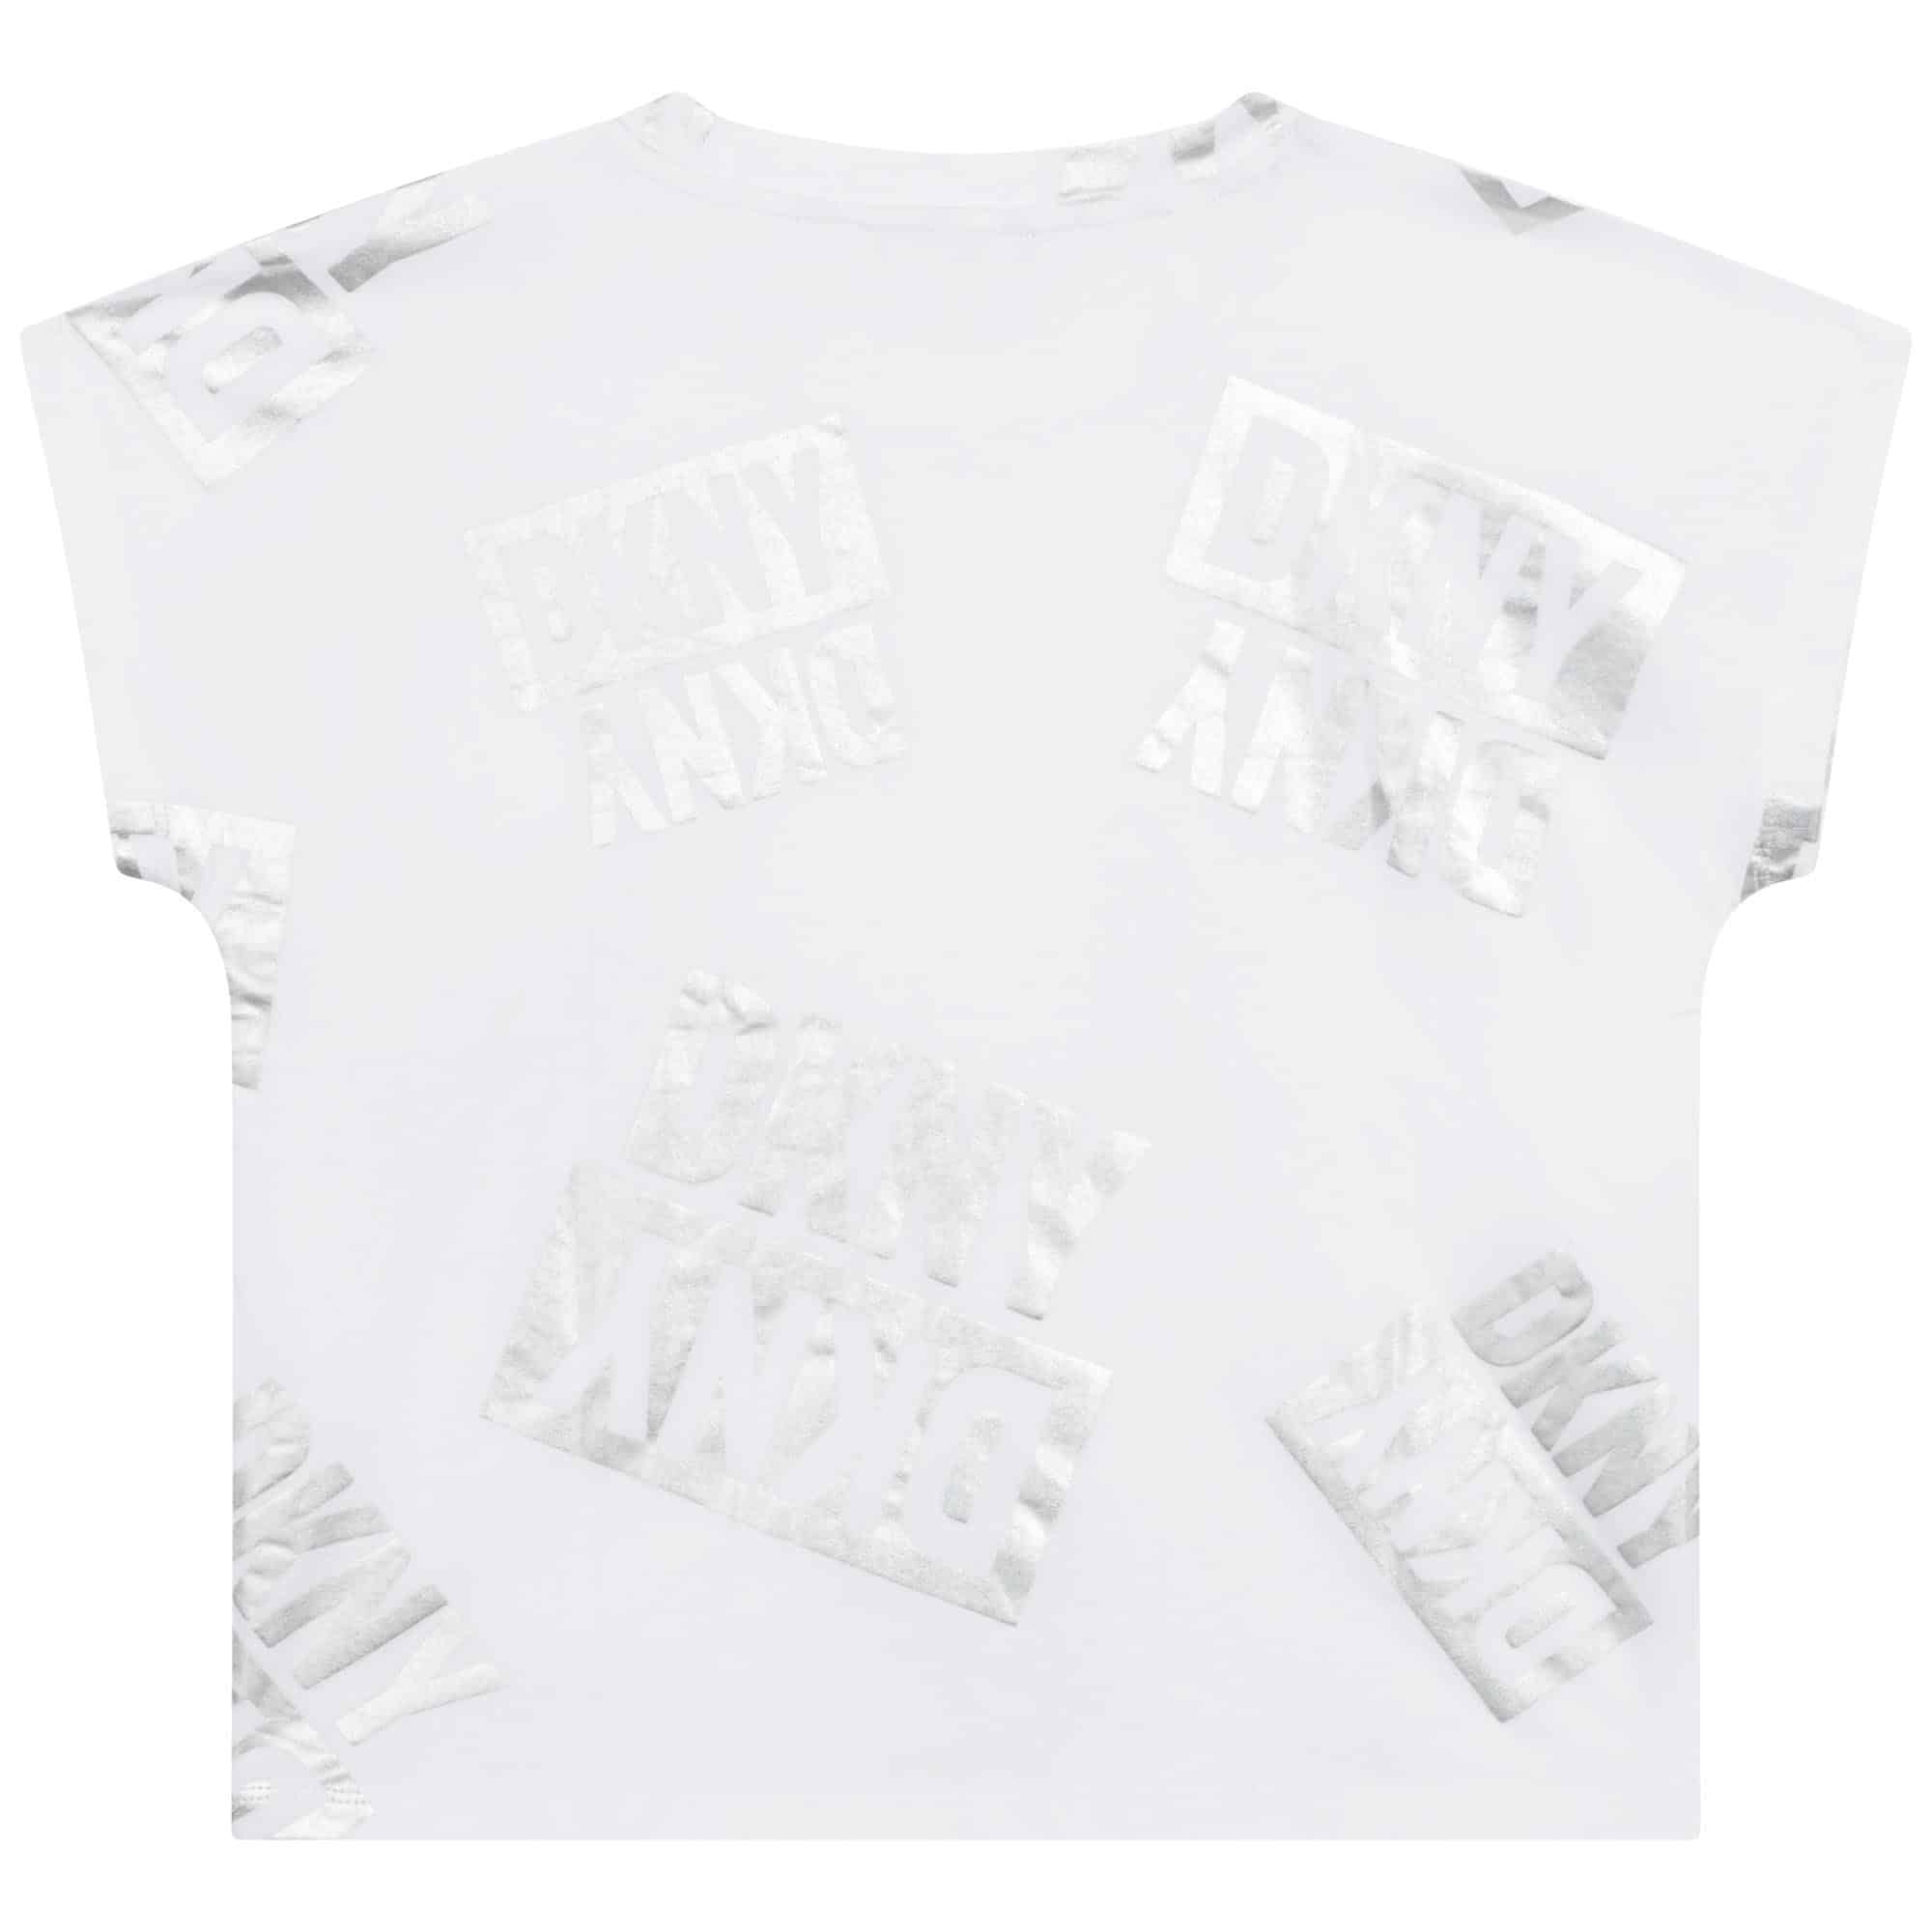 DKNY girls white tshirt with multiple silver logos back views